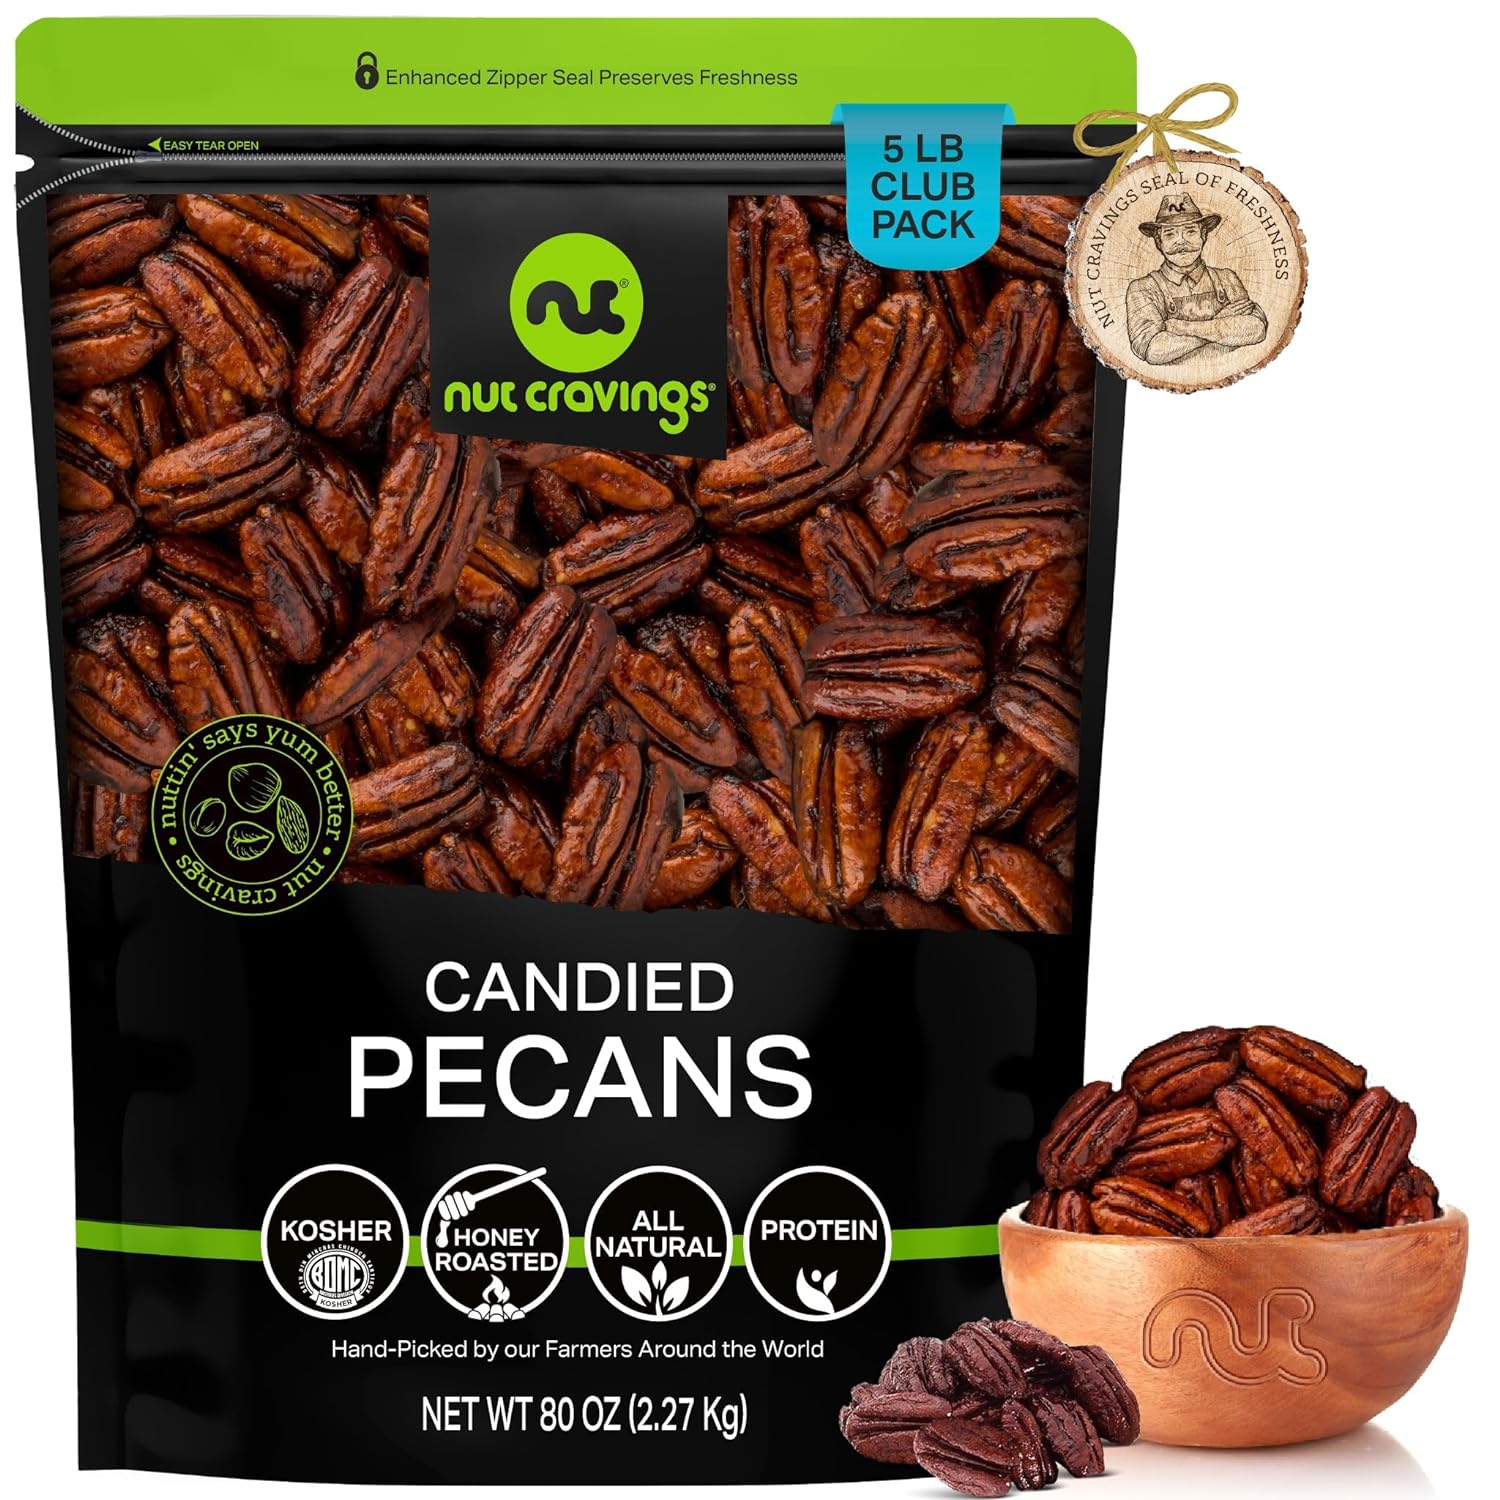 Nut Cravings - Candied Pecans Honey Glazed Praline, No Shell (80oz - 5 LB) Bulk Nuts Packed Fresh in Resealable Bag - Healthy Protein Food Snack, All Natural, Keto Friendly, Vegan, Kosher